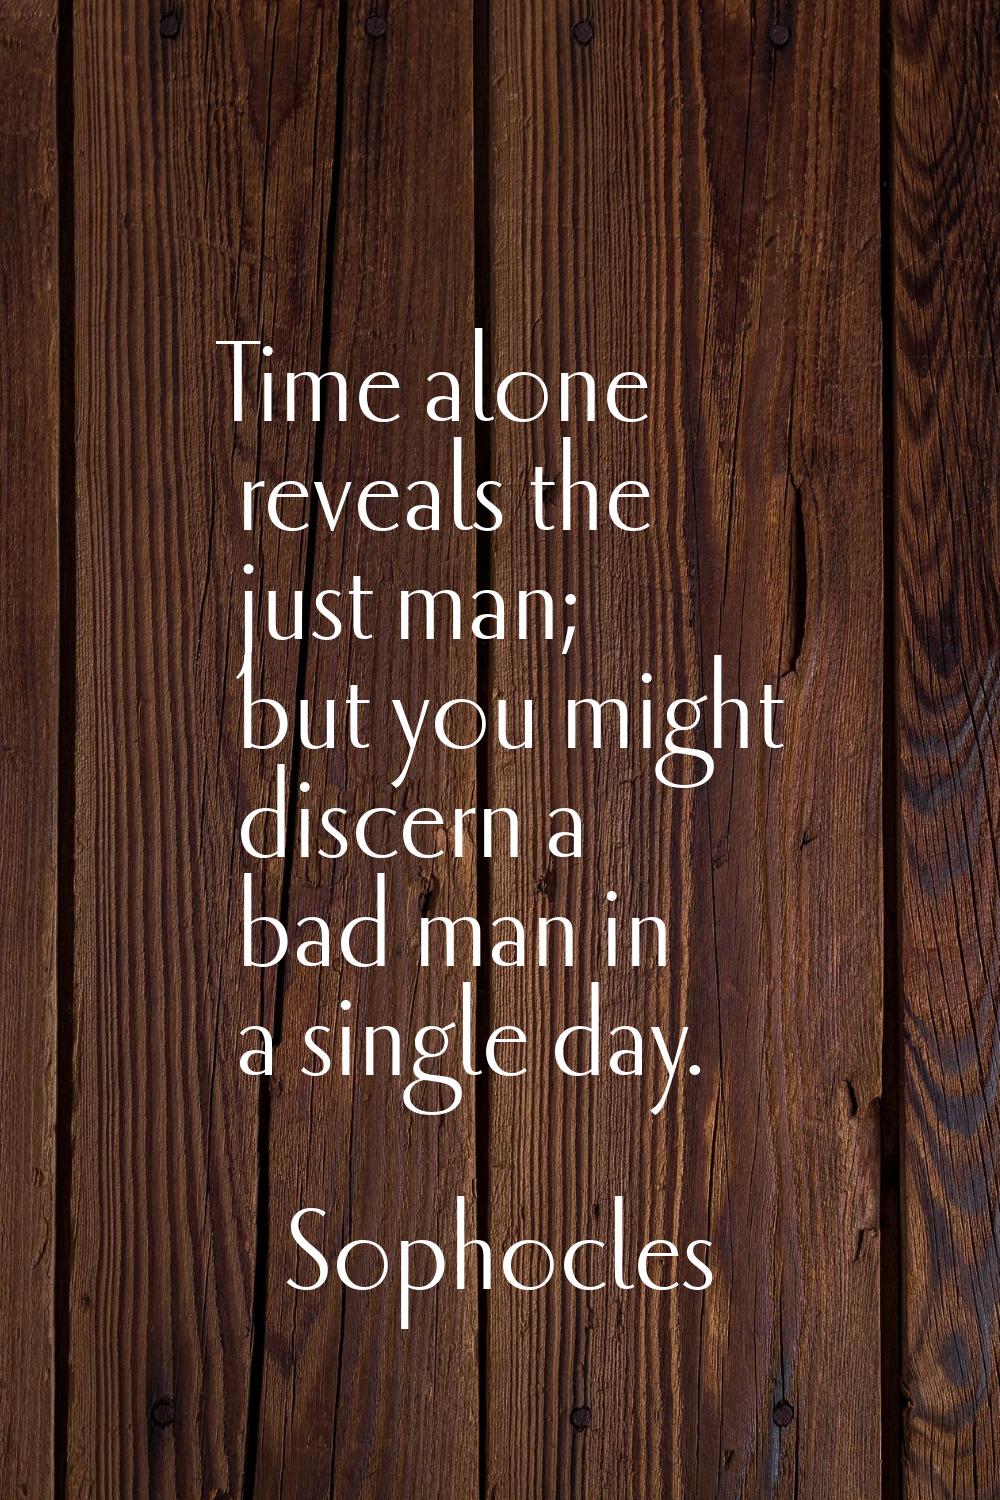 Time alone reveals the just man; but you might discern a bad man in a single day.